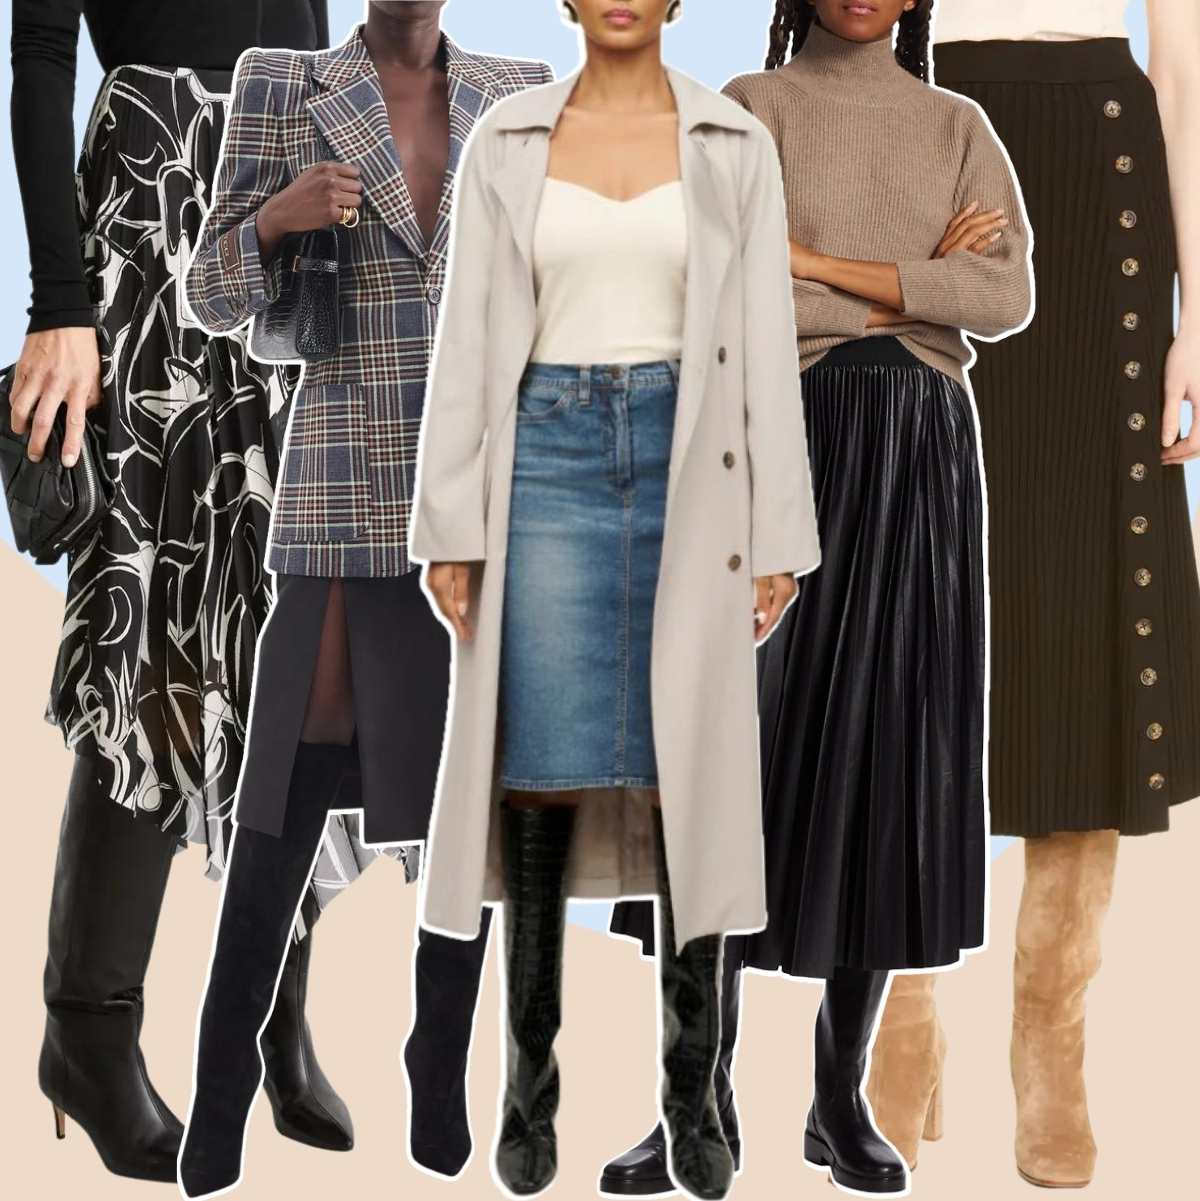 Collage of 5 women different knee boots with midi skirts.